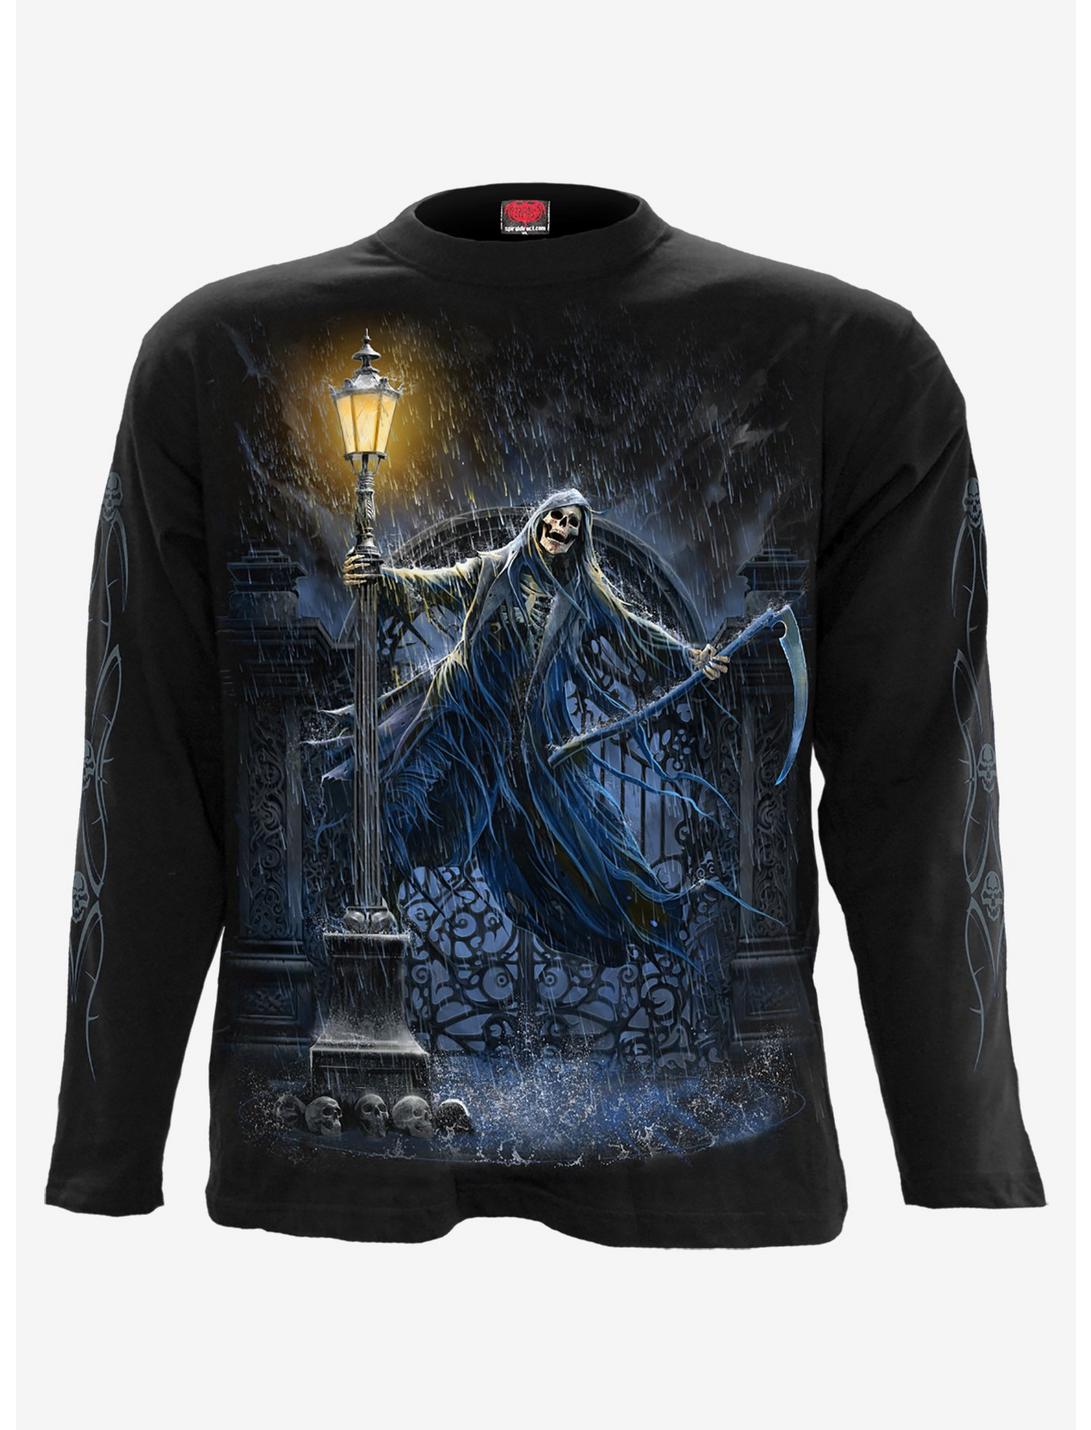 Spiral Reaping In The Rain Long Sleeve Shirt, BLACK, hi-res